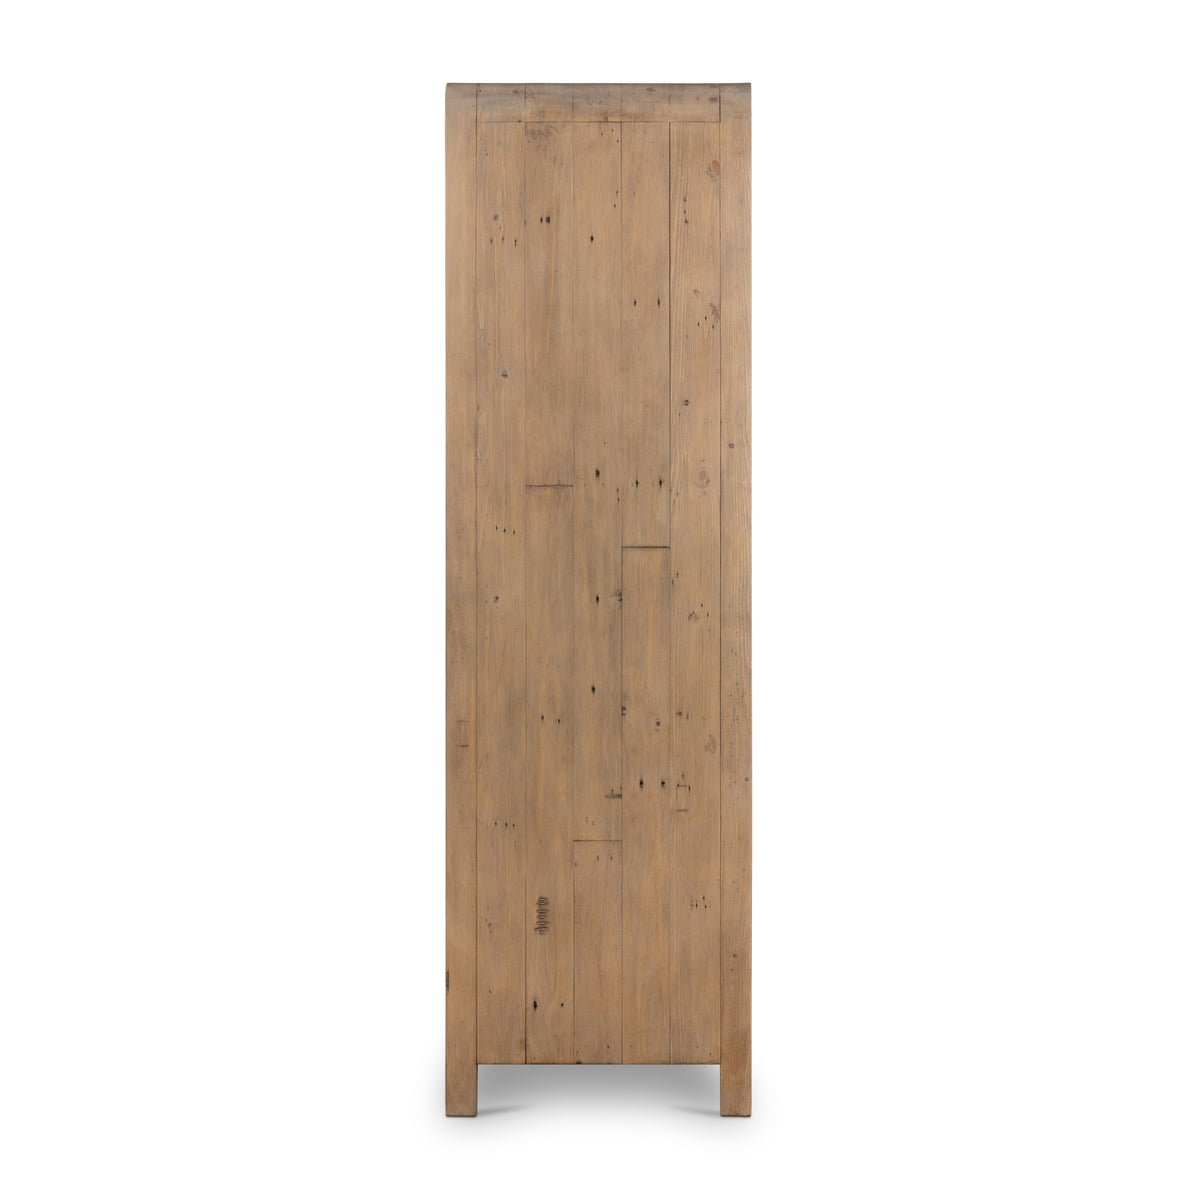 Everly Cabinet - Scrubbed Teak